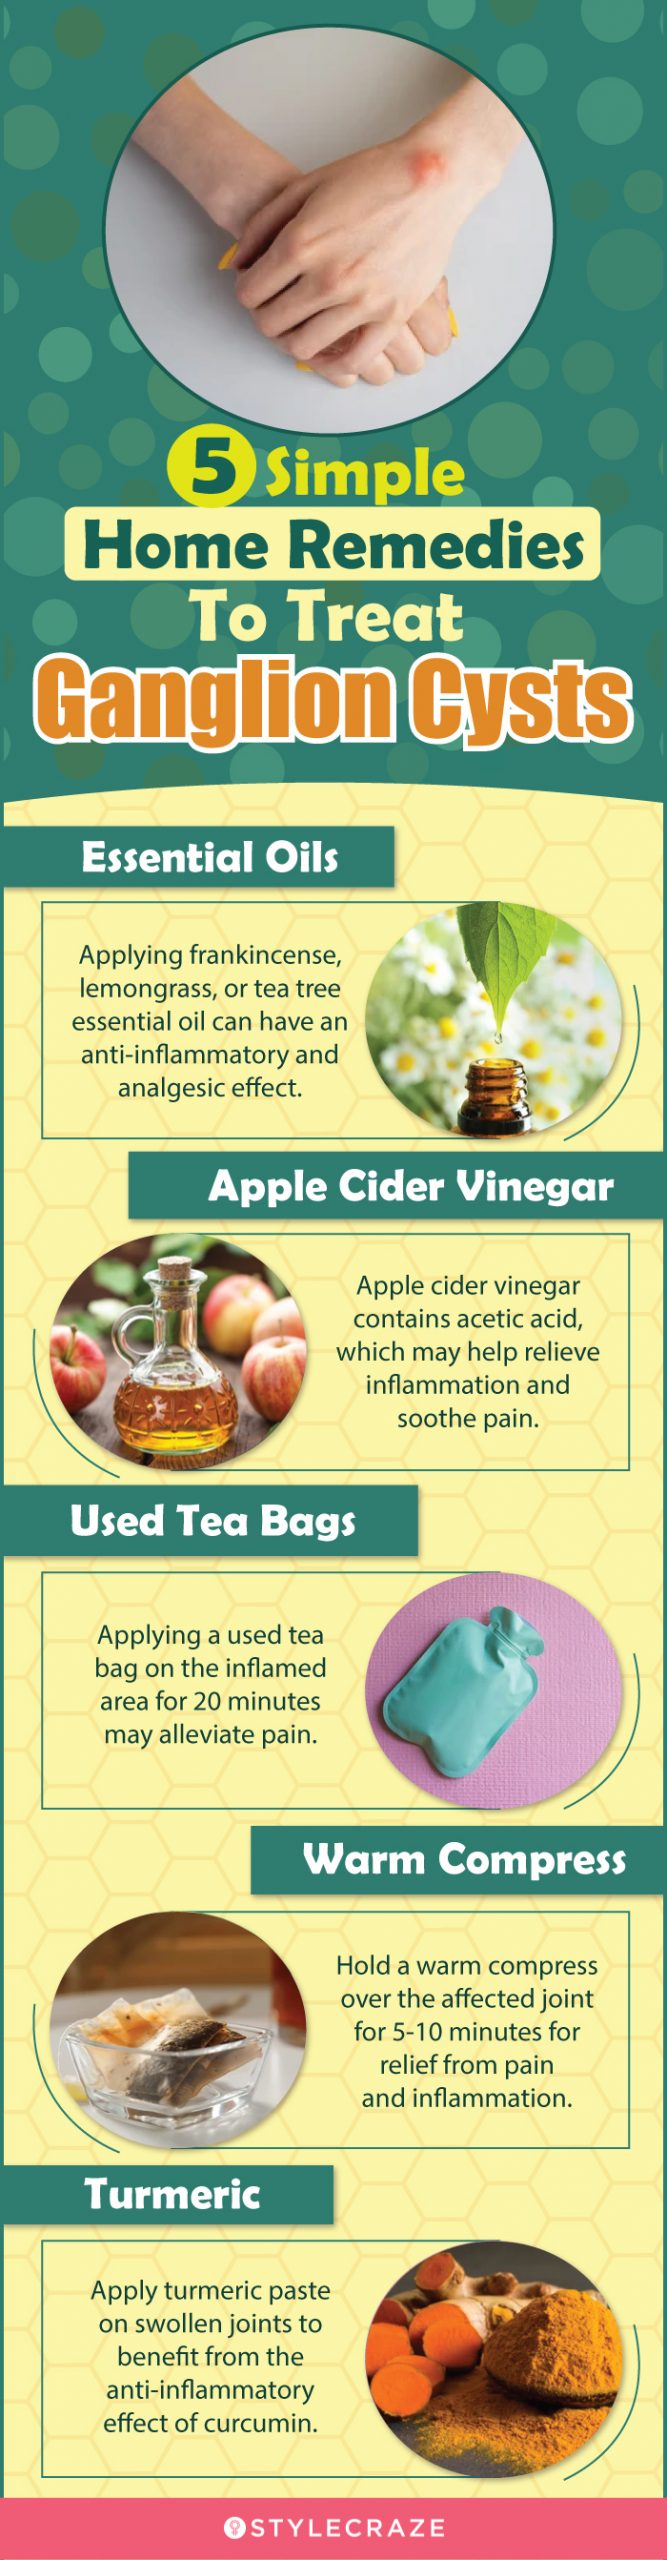 5 simple home remedies to treat ganglion cysts (infographic)